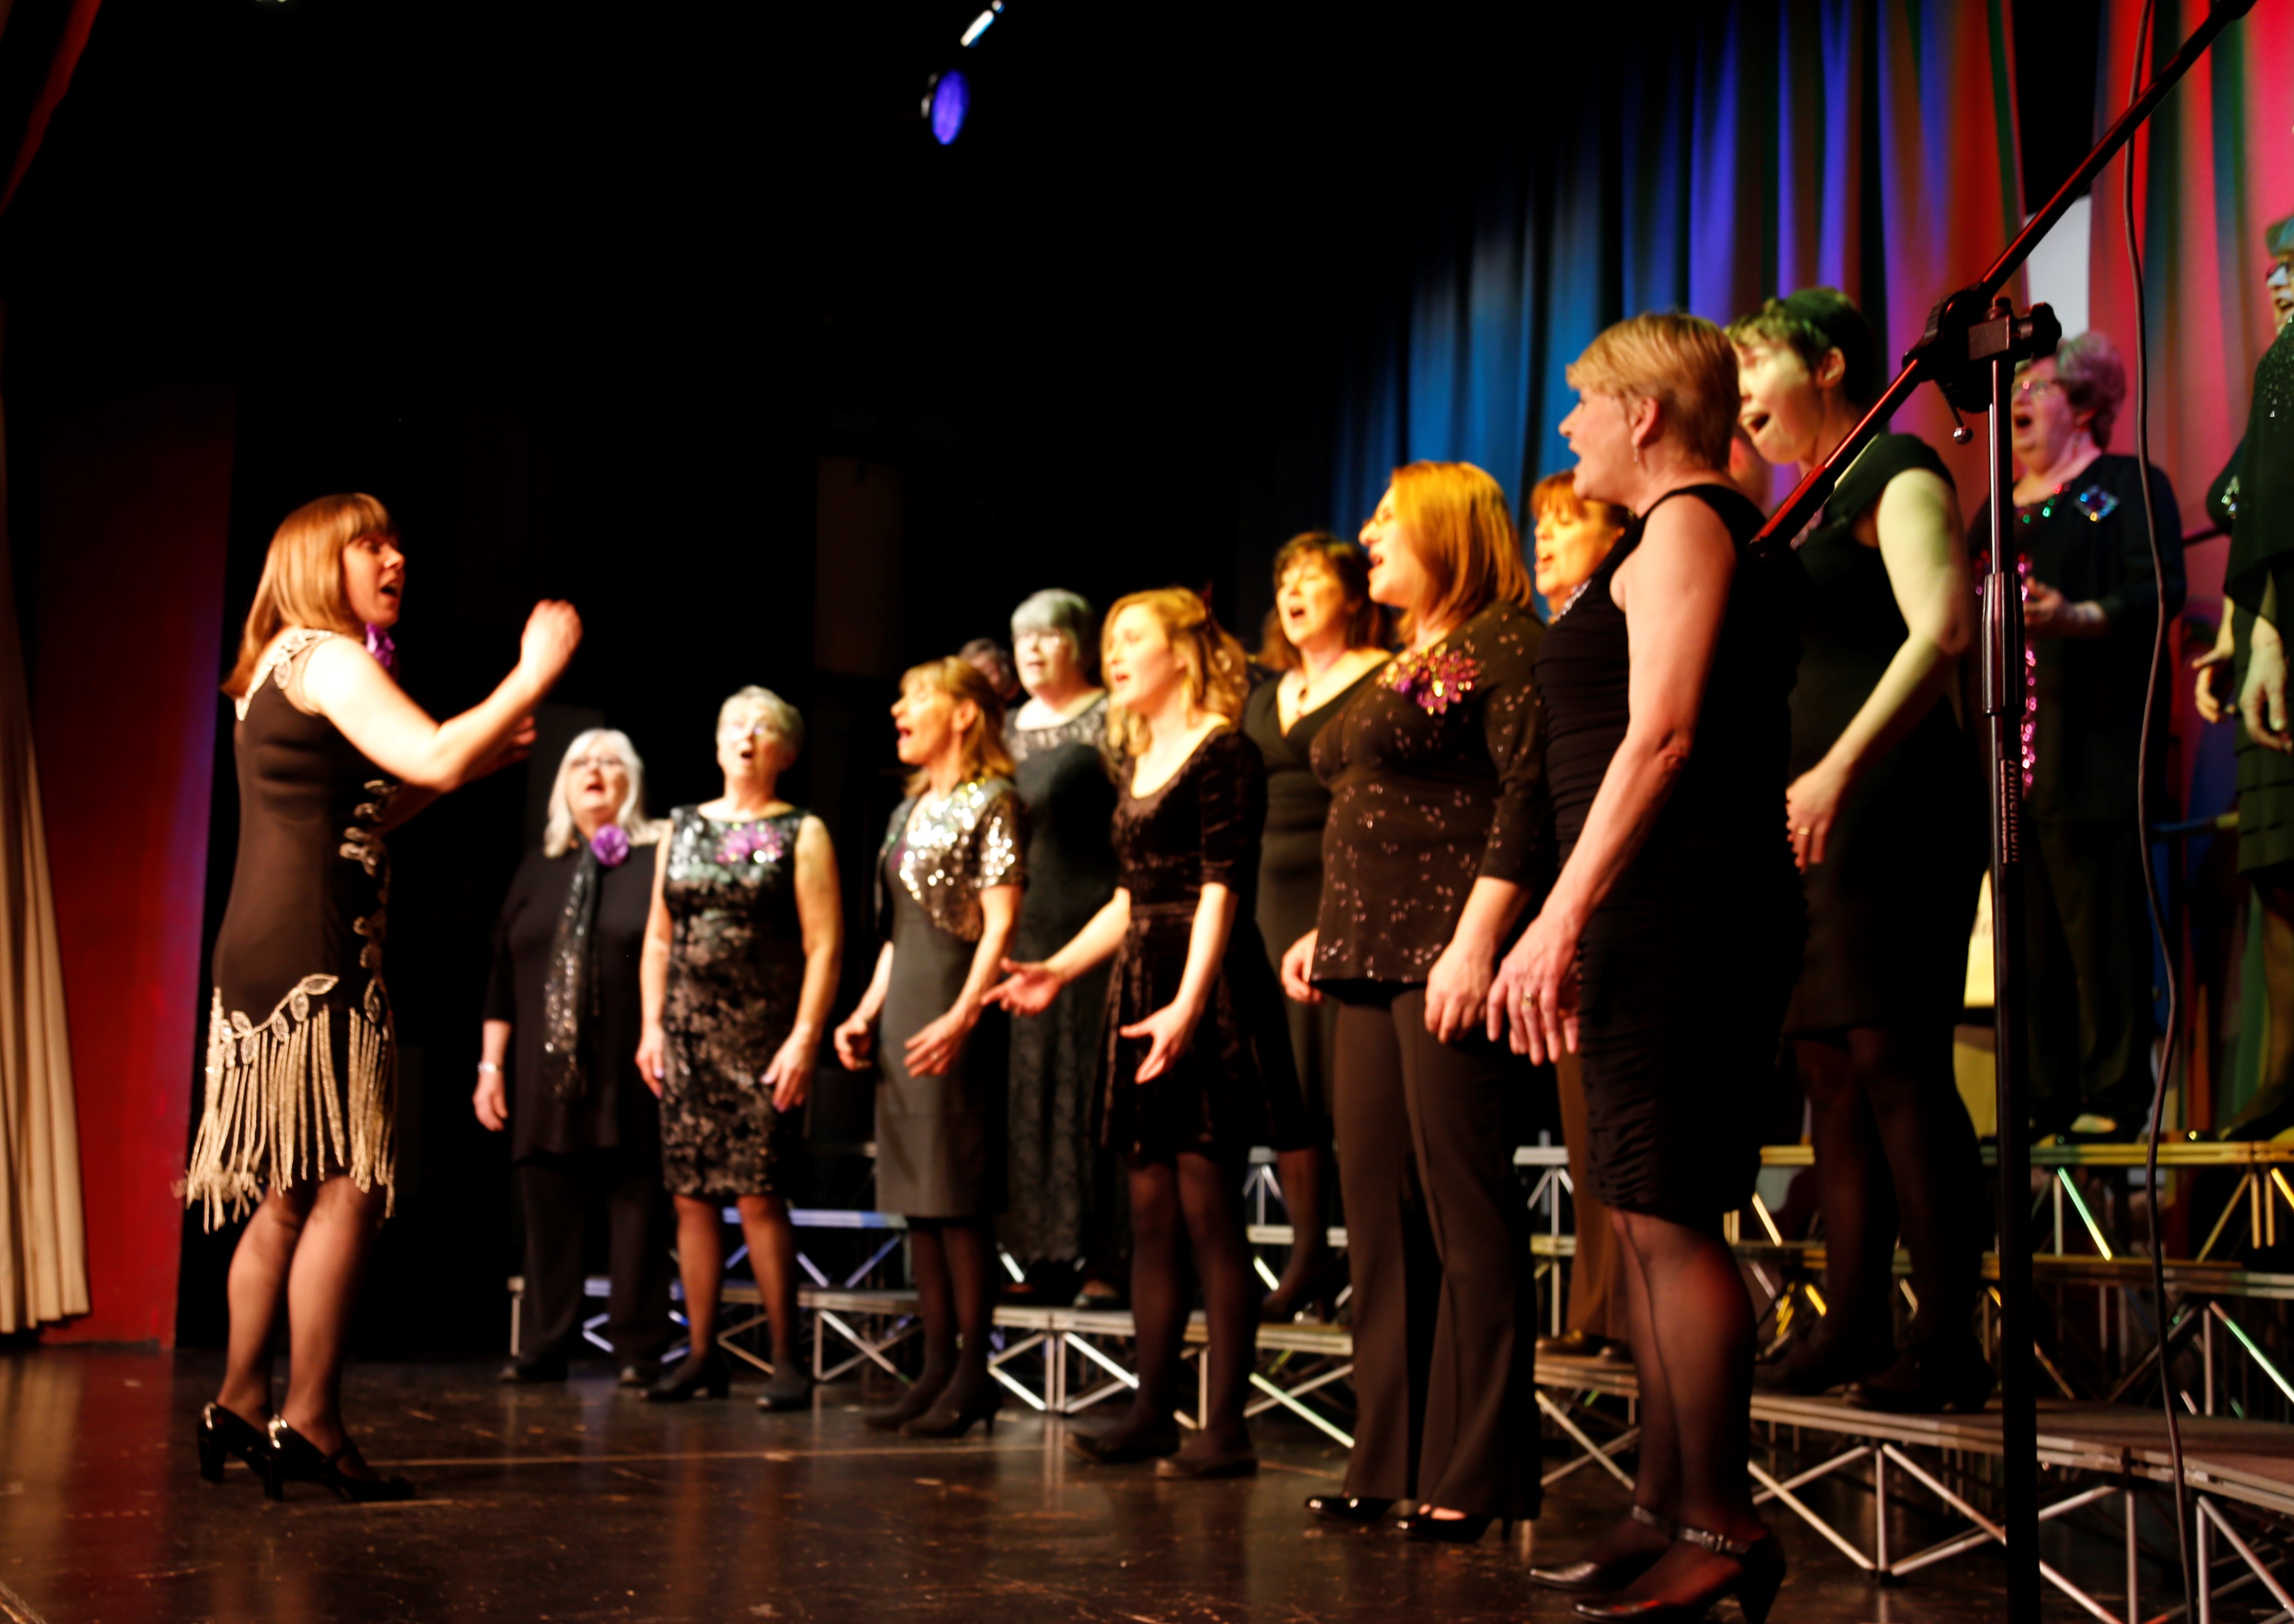 Avon Harmony A Cappella Choir sing at your events.